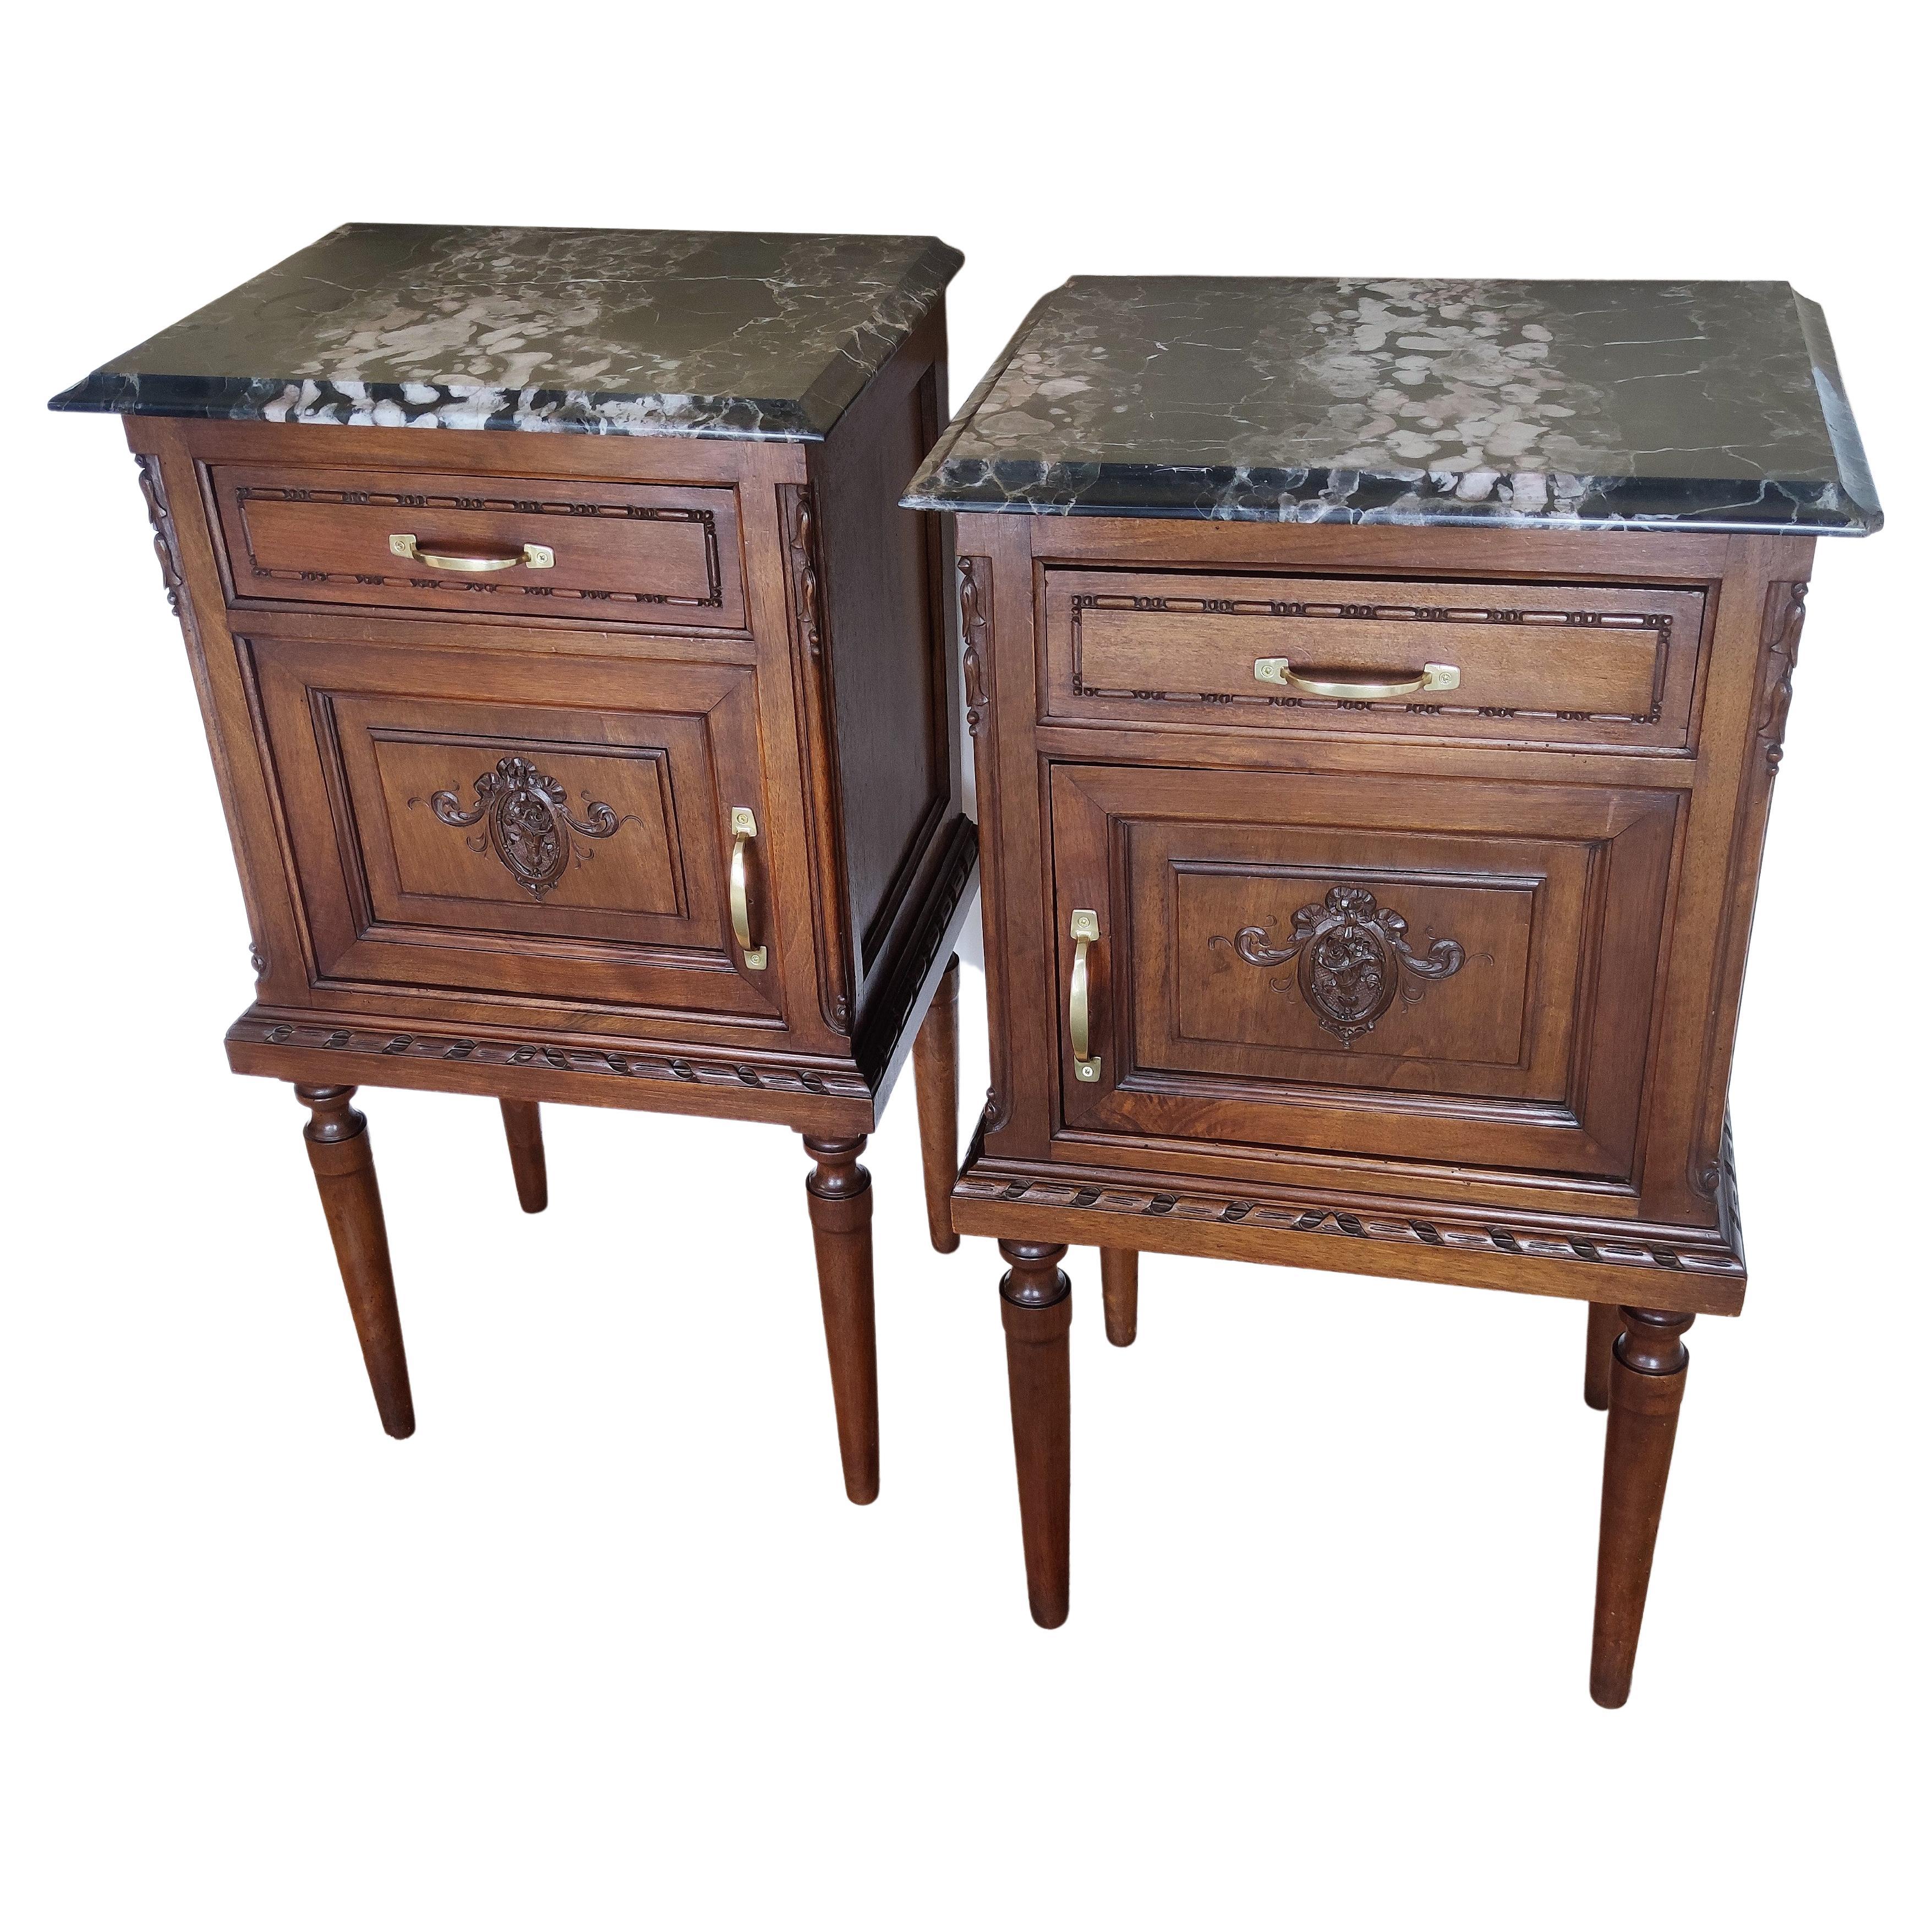 Pair of Italian Antique Carved Walnut Black Marble Top Night Stands Bed Tables